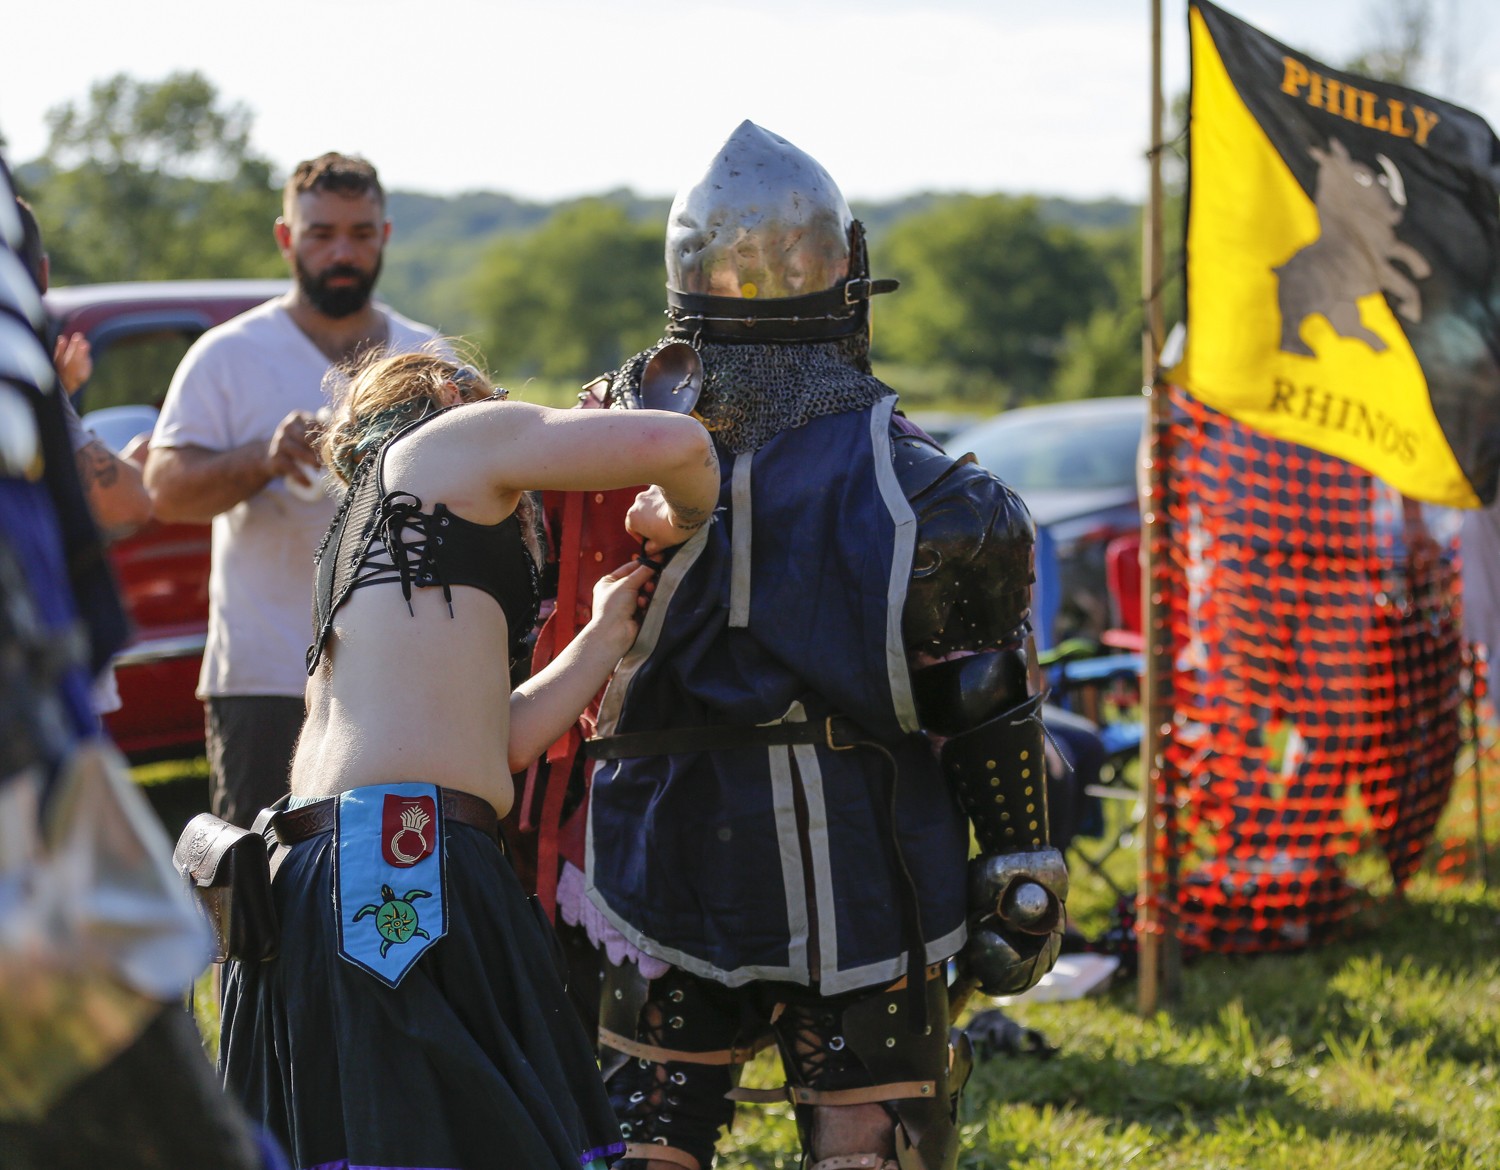 A knight gets components of his armor checked before he enters the ring.